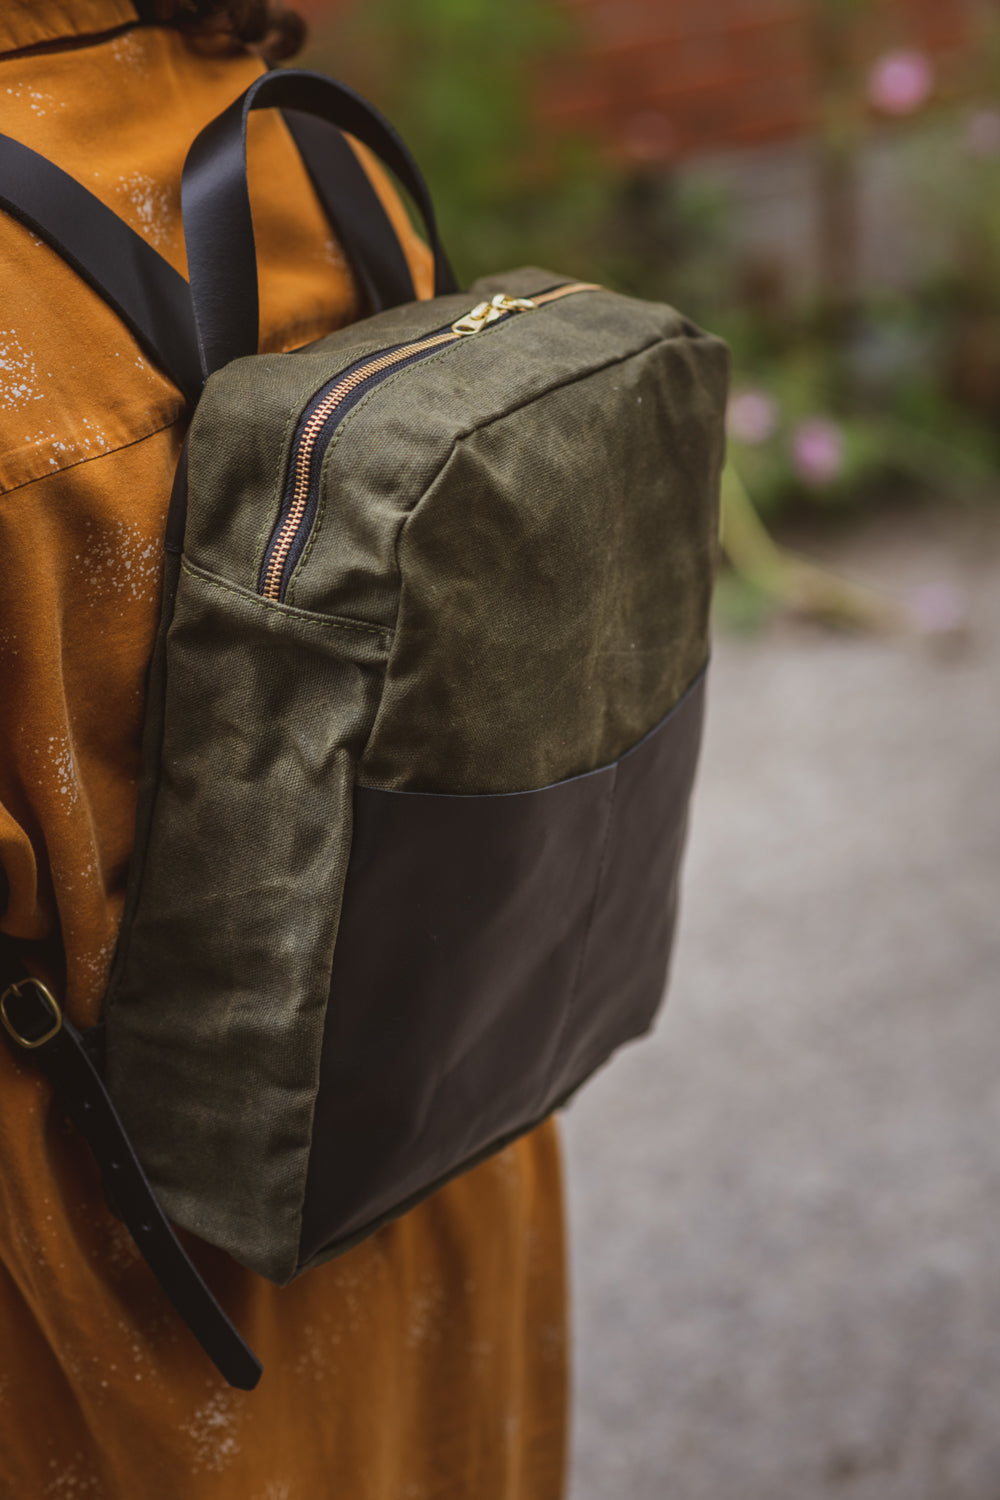 Veinage Gilford black leather and army green waxed canvas backpack, handmade in Montreal Canada